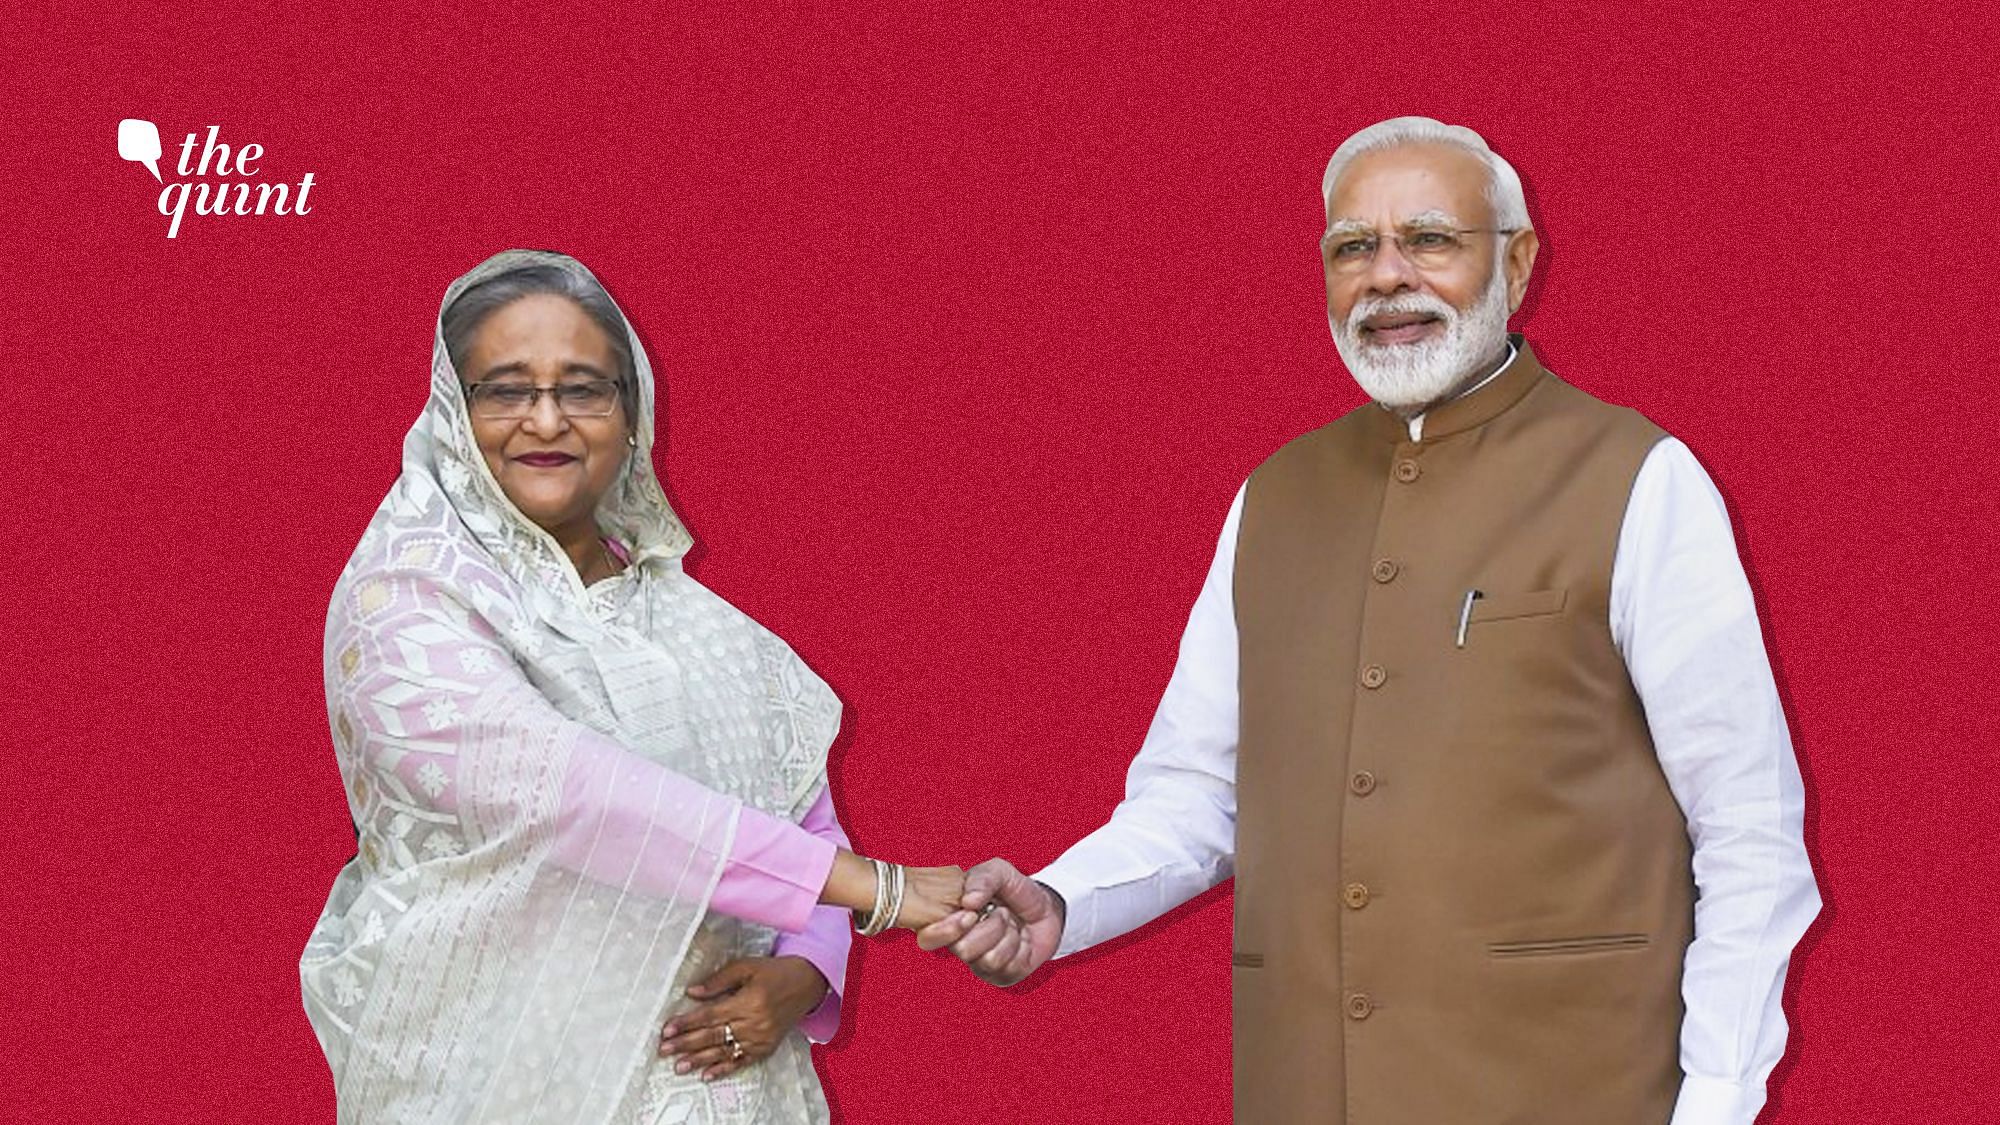 Hasina can’t say she got ‘any definite’ assurances on her concerns – perhaps she goes back with more worries on NRC.